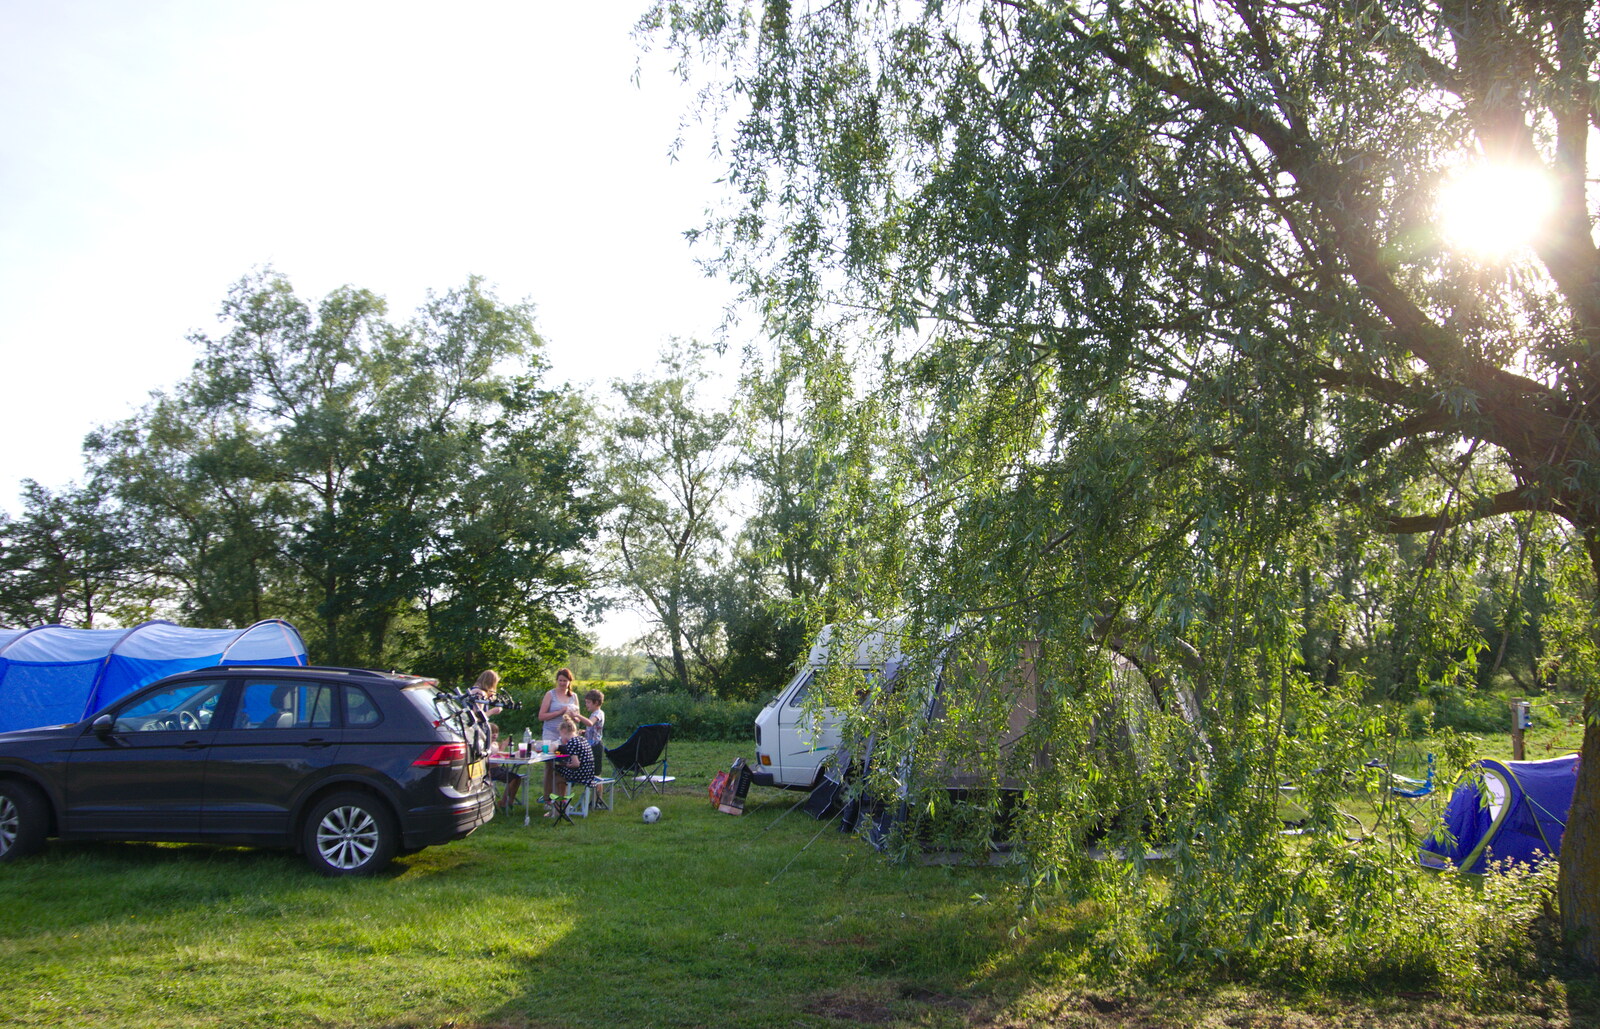 Our camp from Camping at Three Rivers, Geldeston, Norfolk - 1st June 2019